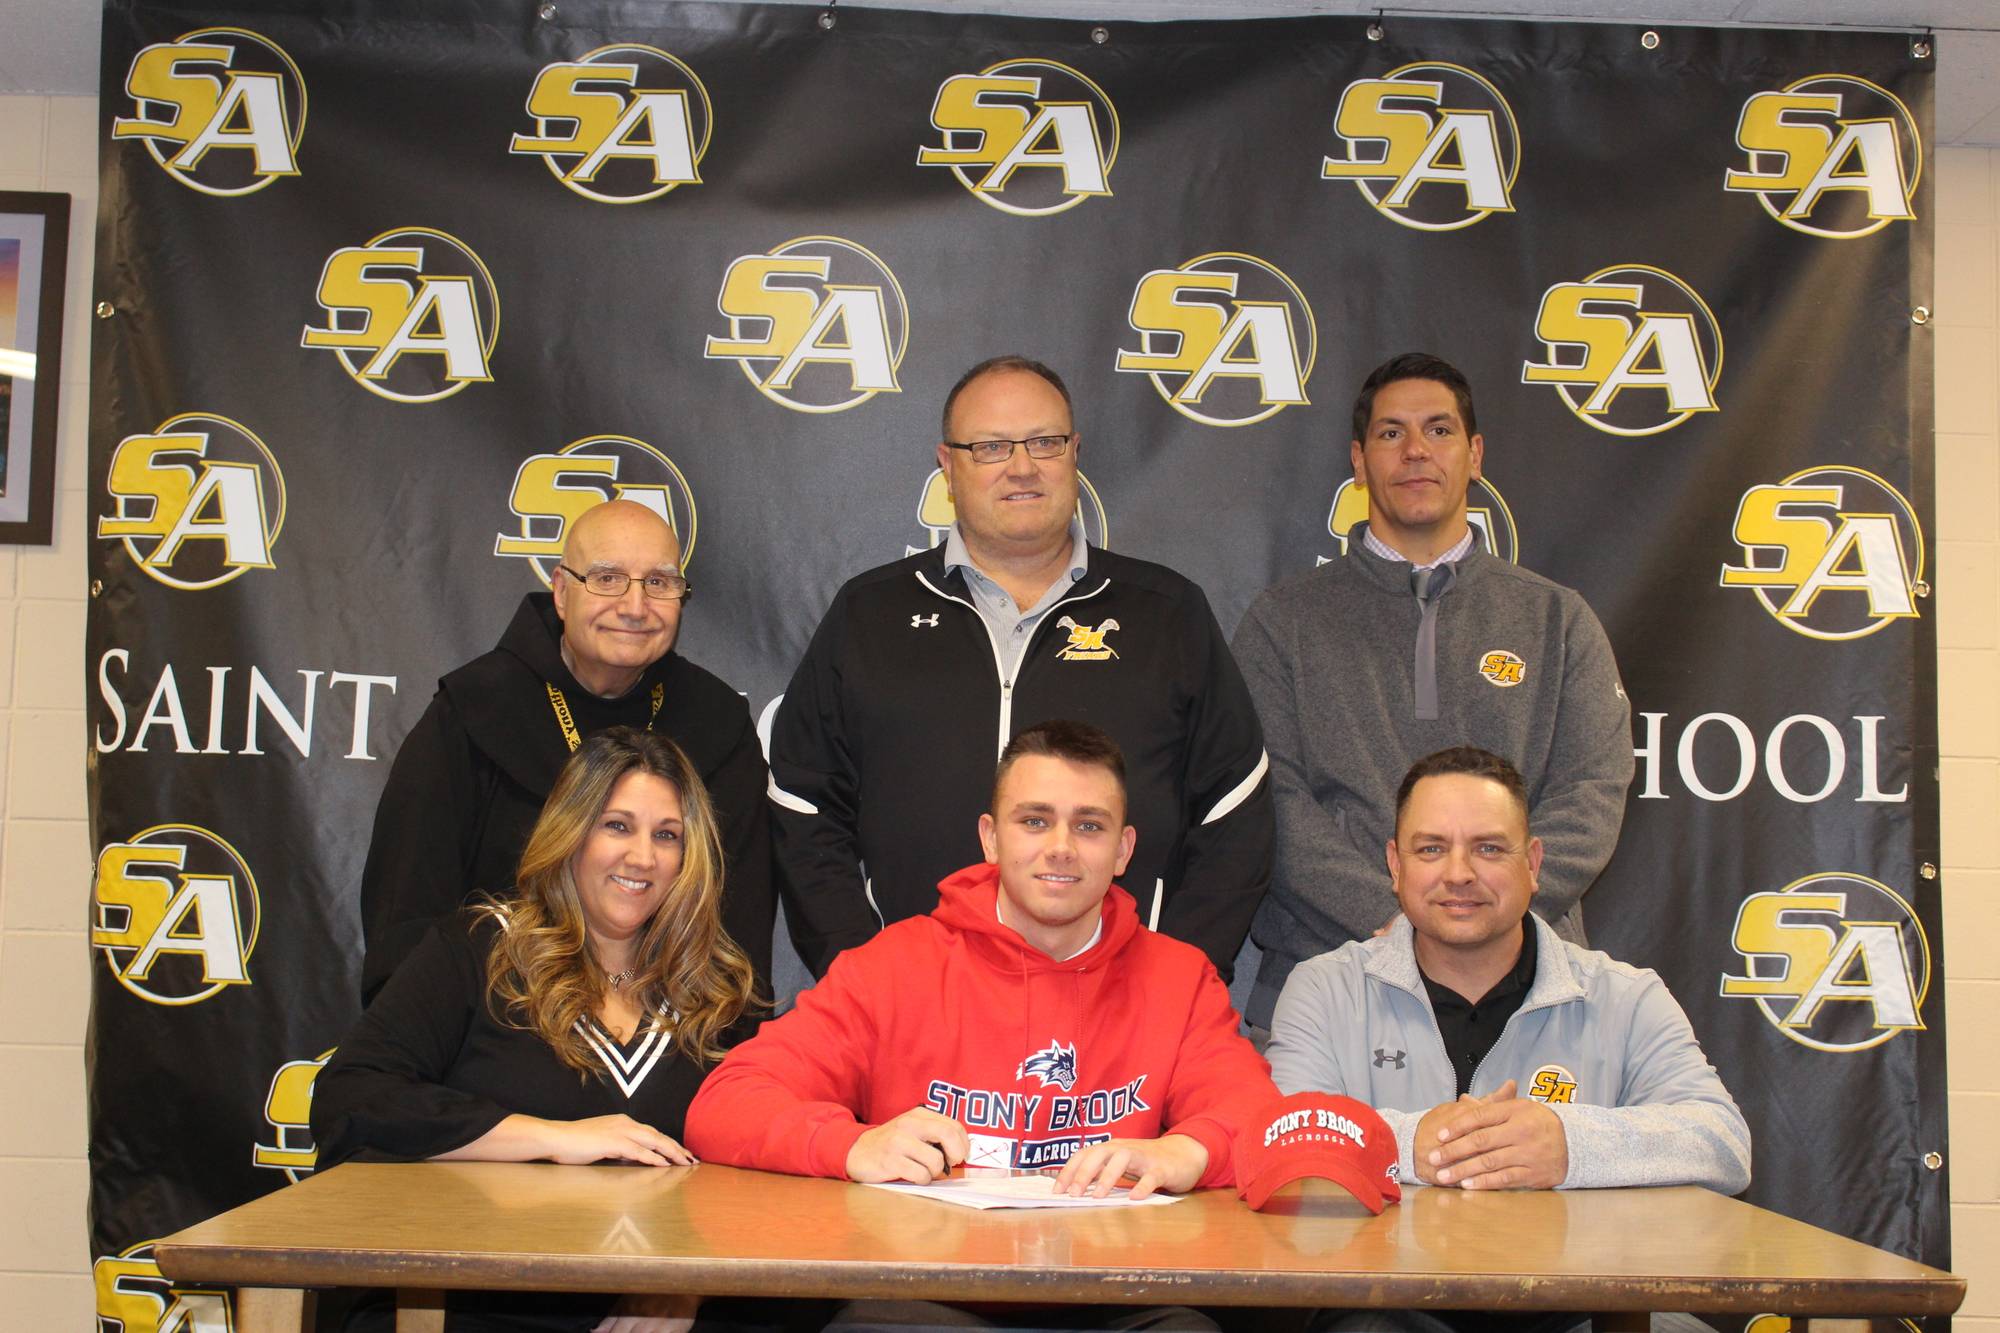 Quentin Sommer will be playing for Stony Brook University next fall